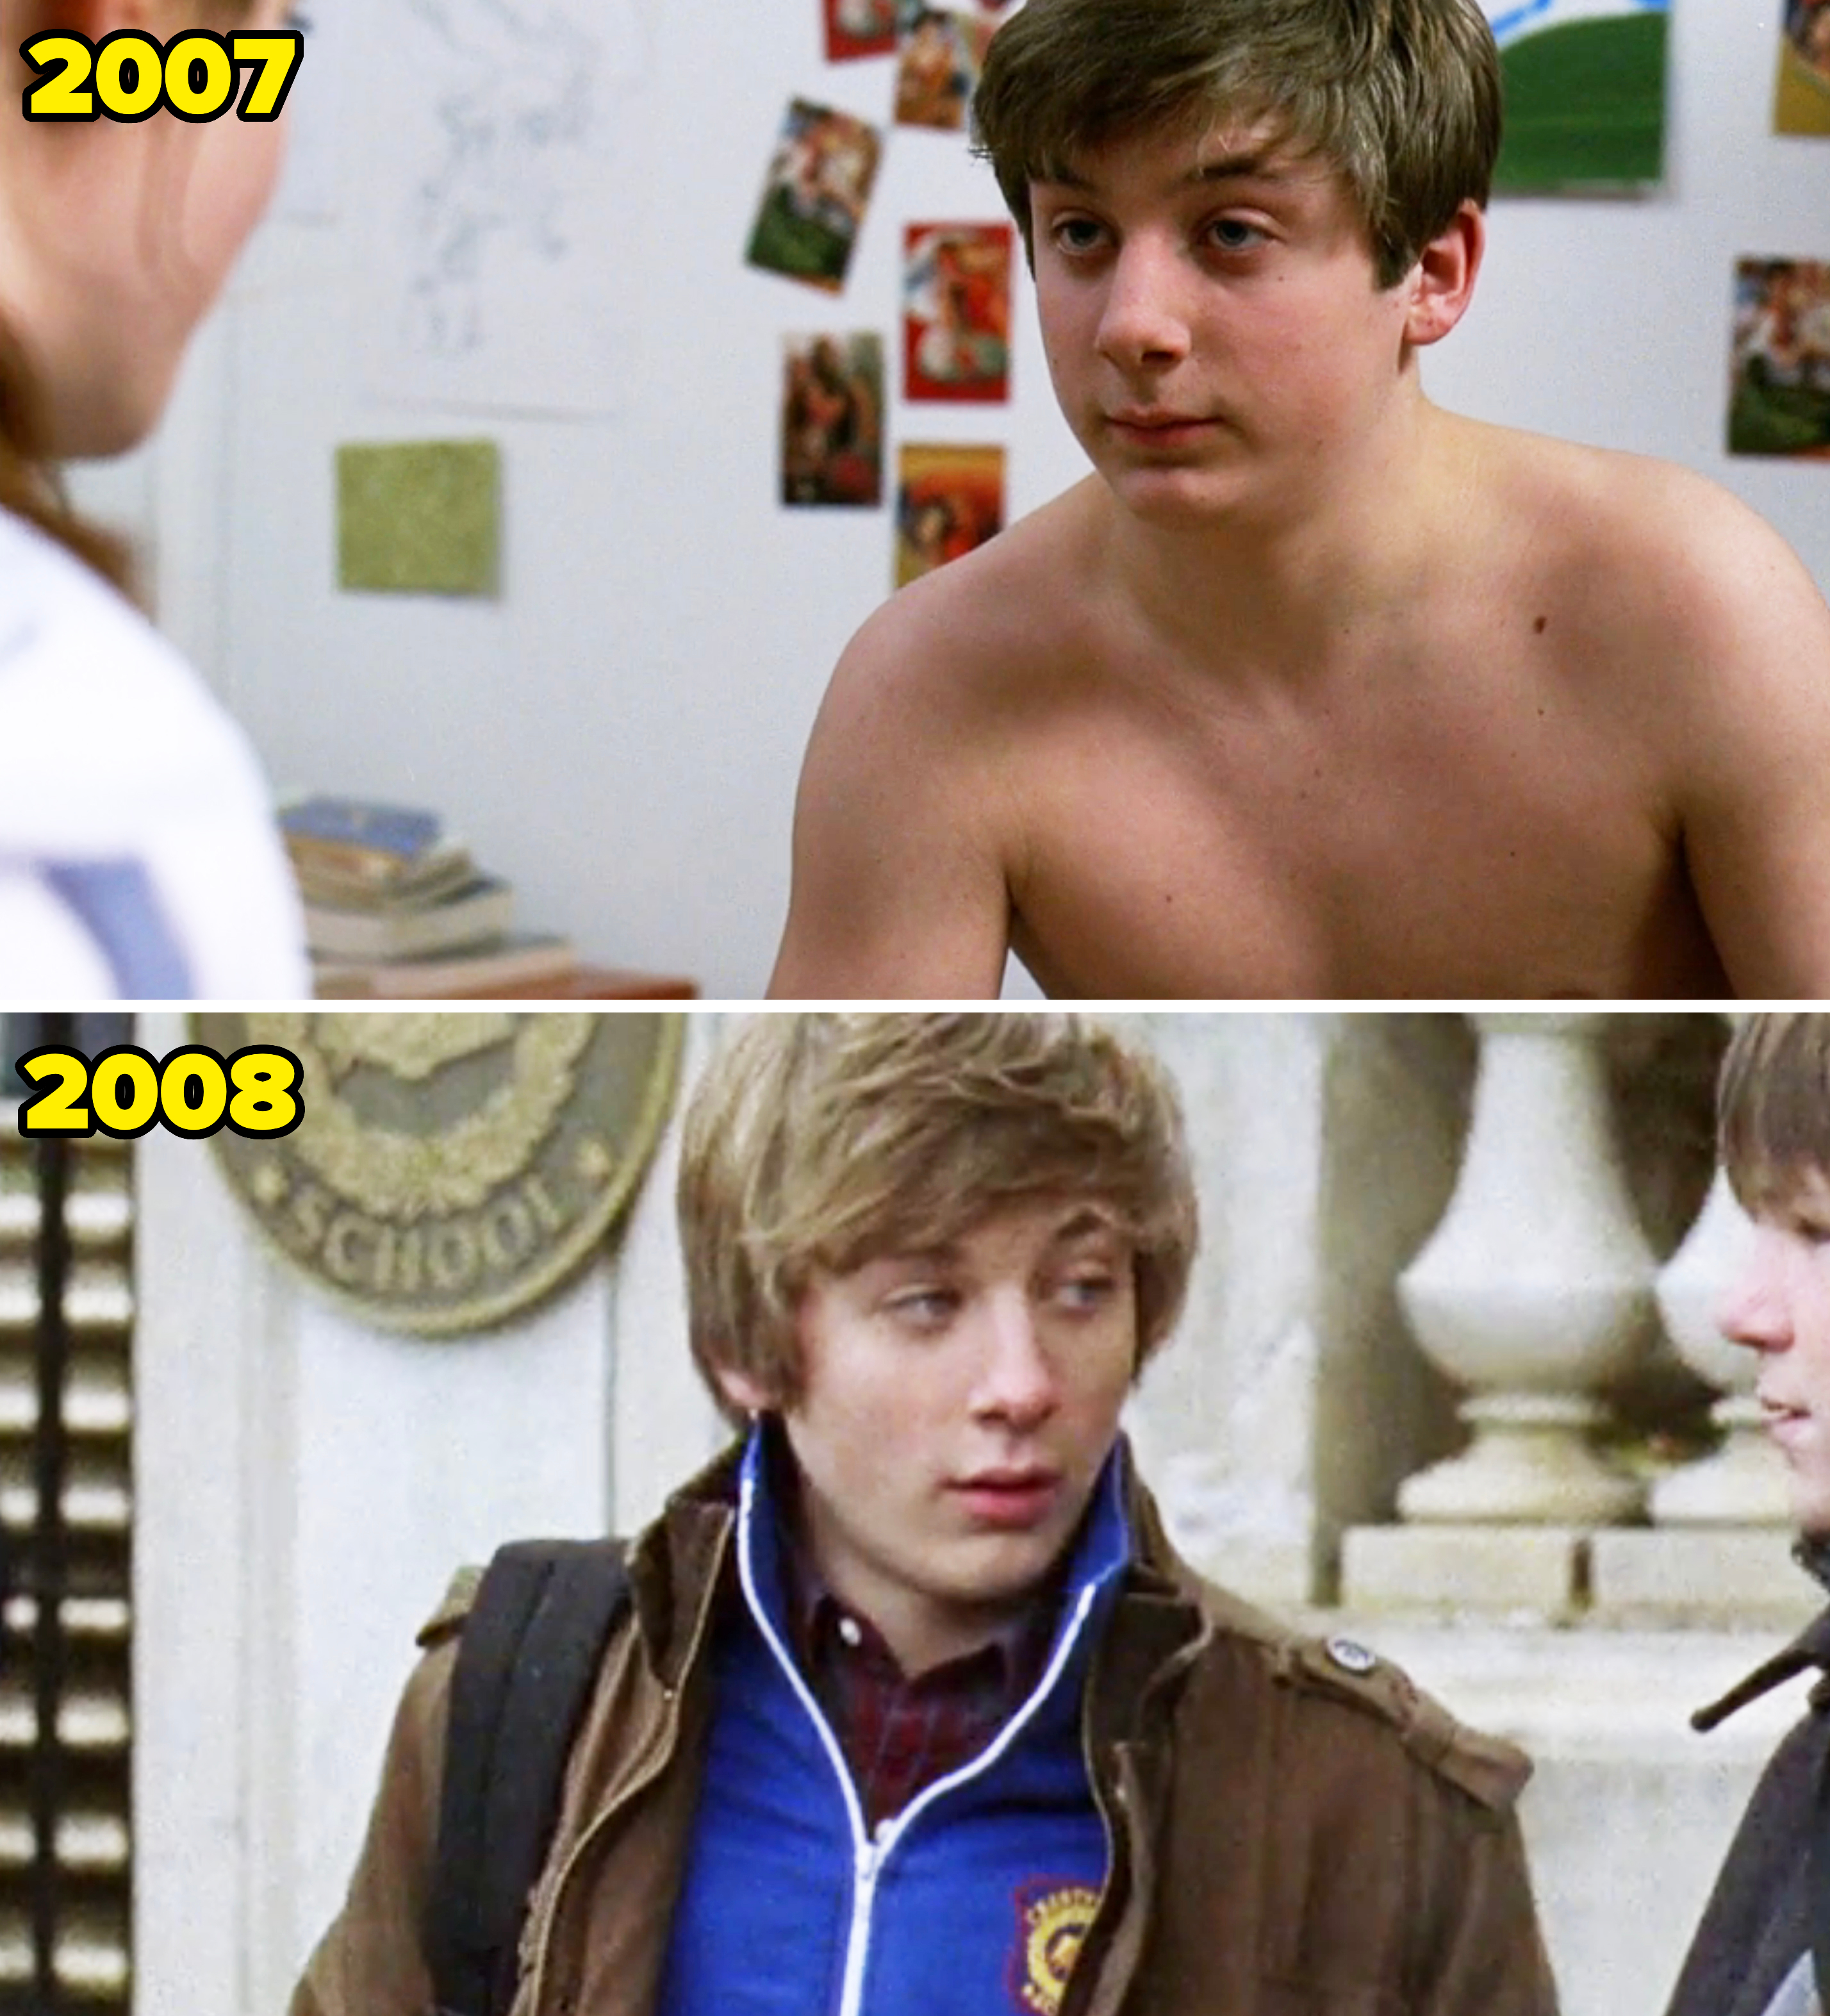 younger him on the show in 2007 and 2008